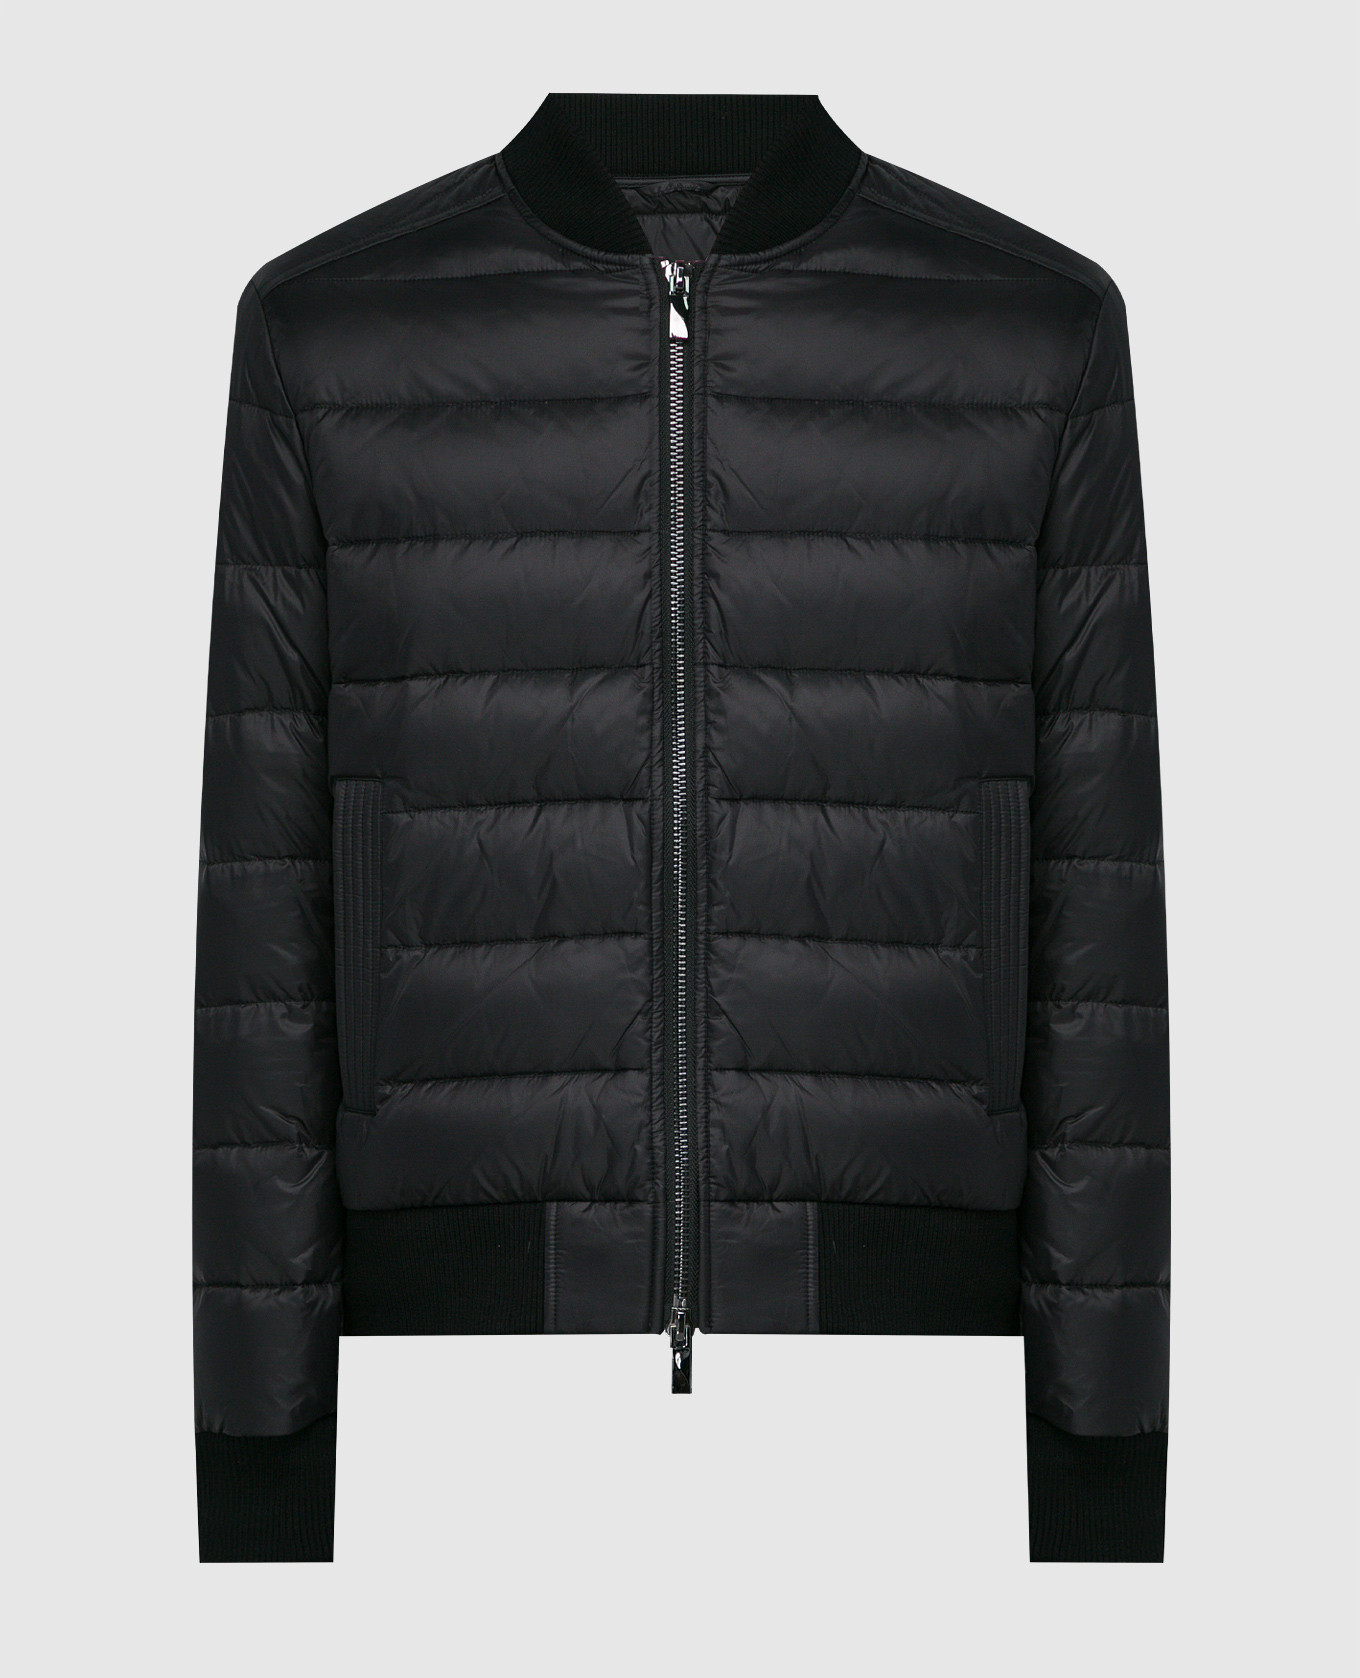 Black down jacket with logo